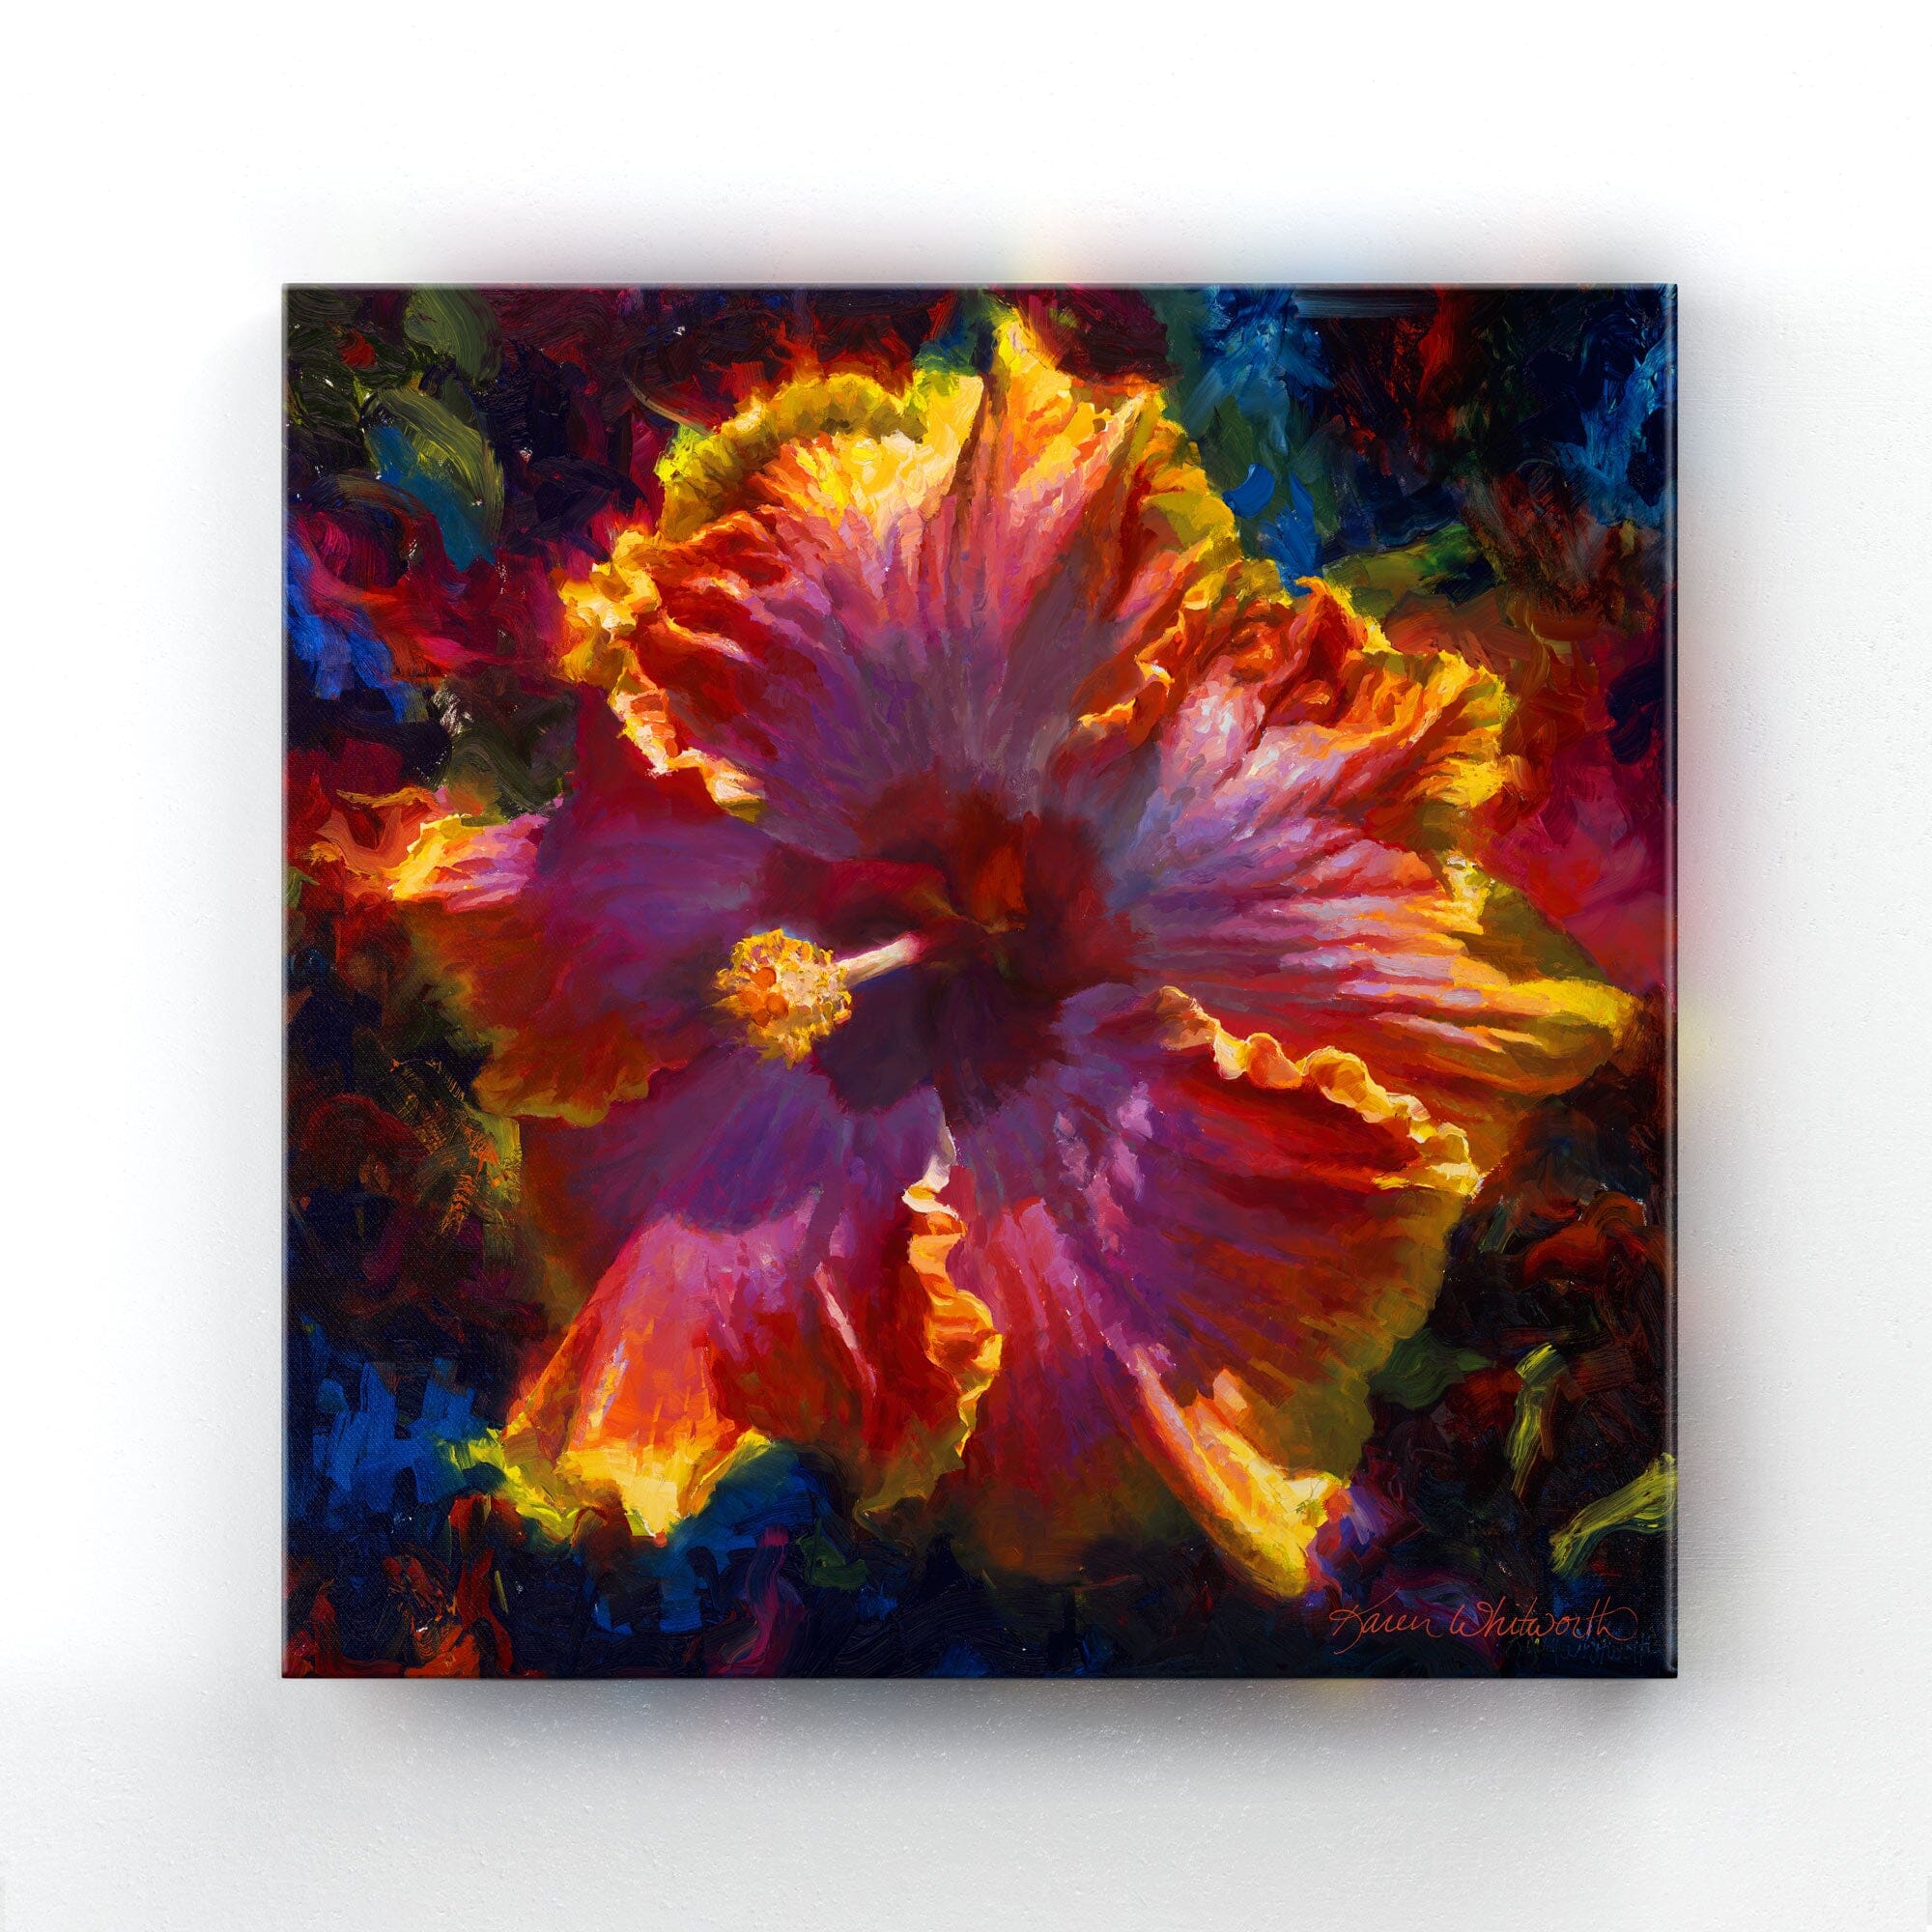 A square Hawaiian hibiscus painting on canvas that is hanging on a white wall. The artwork depicts a rainbow colored flower with ruffled petals and vibrant light full of saturated hues.